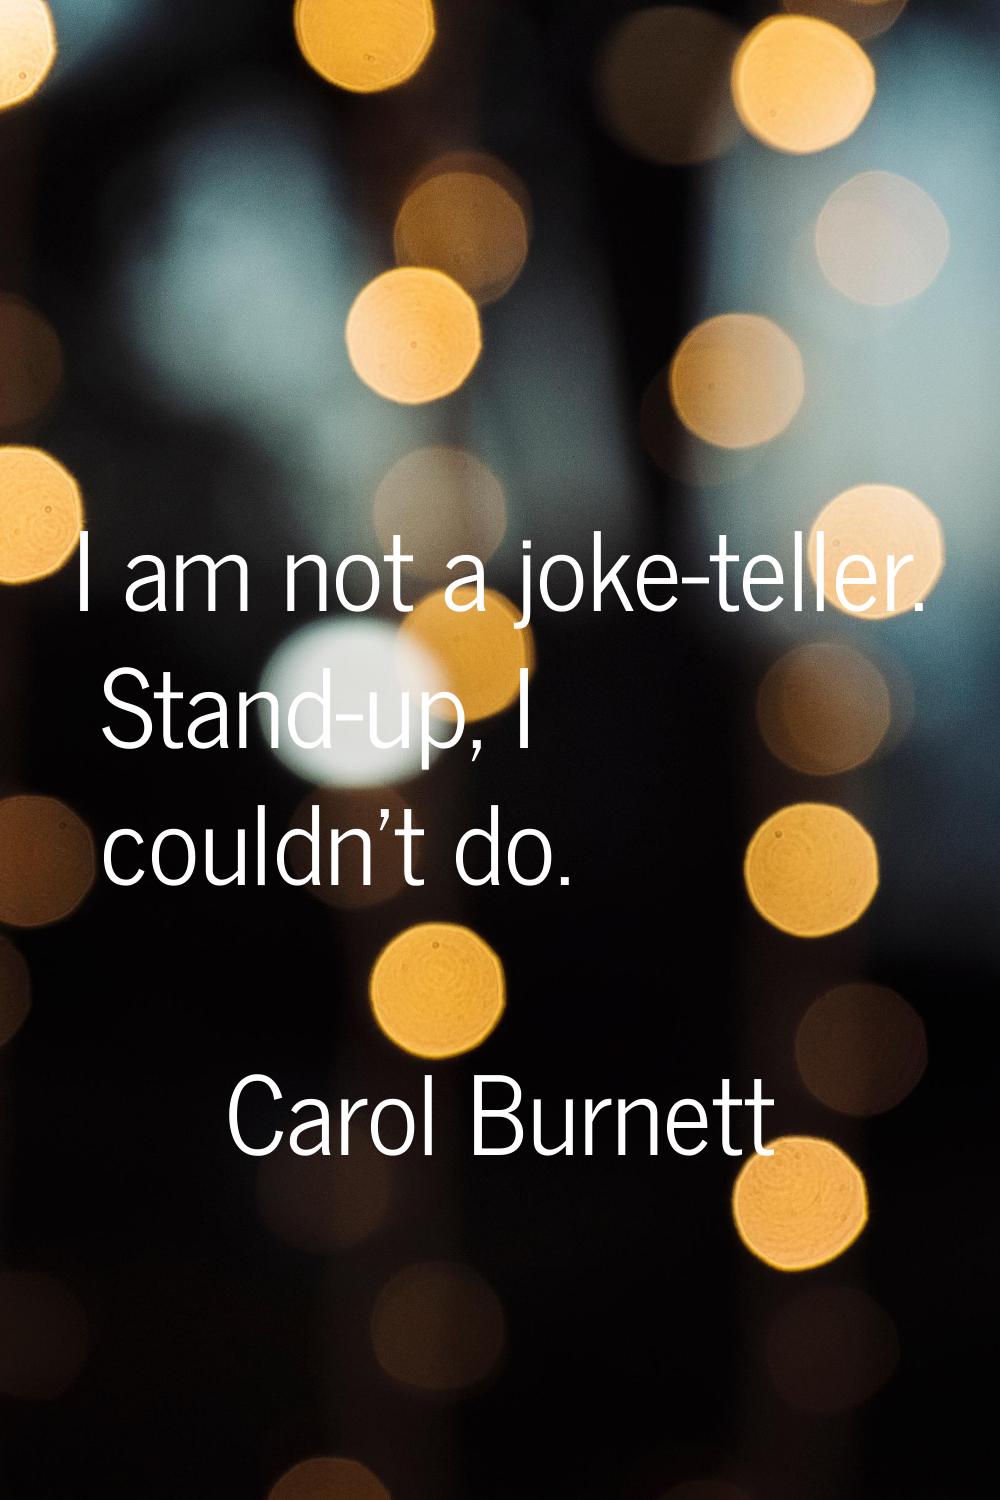 I am not a joke-teller. Stand-up, I couldn't do.